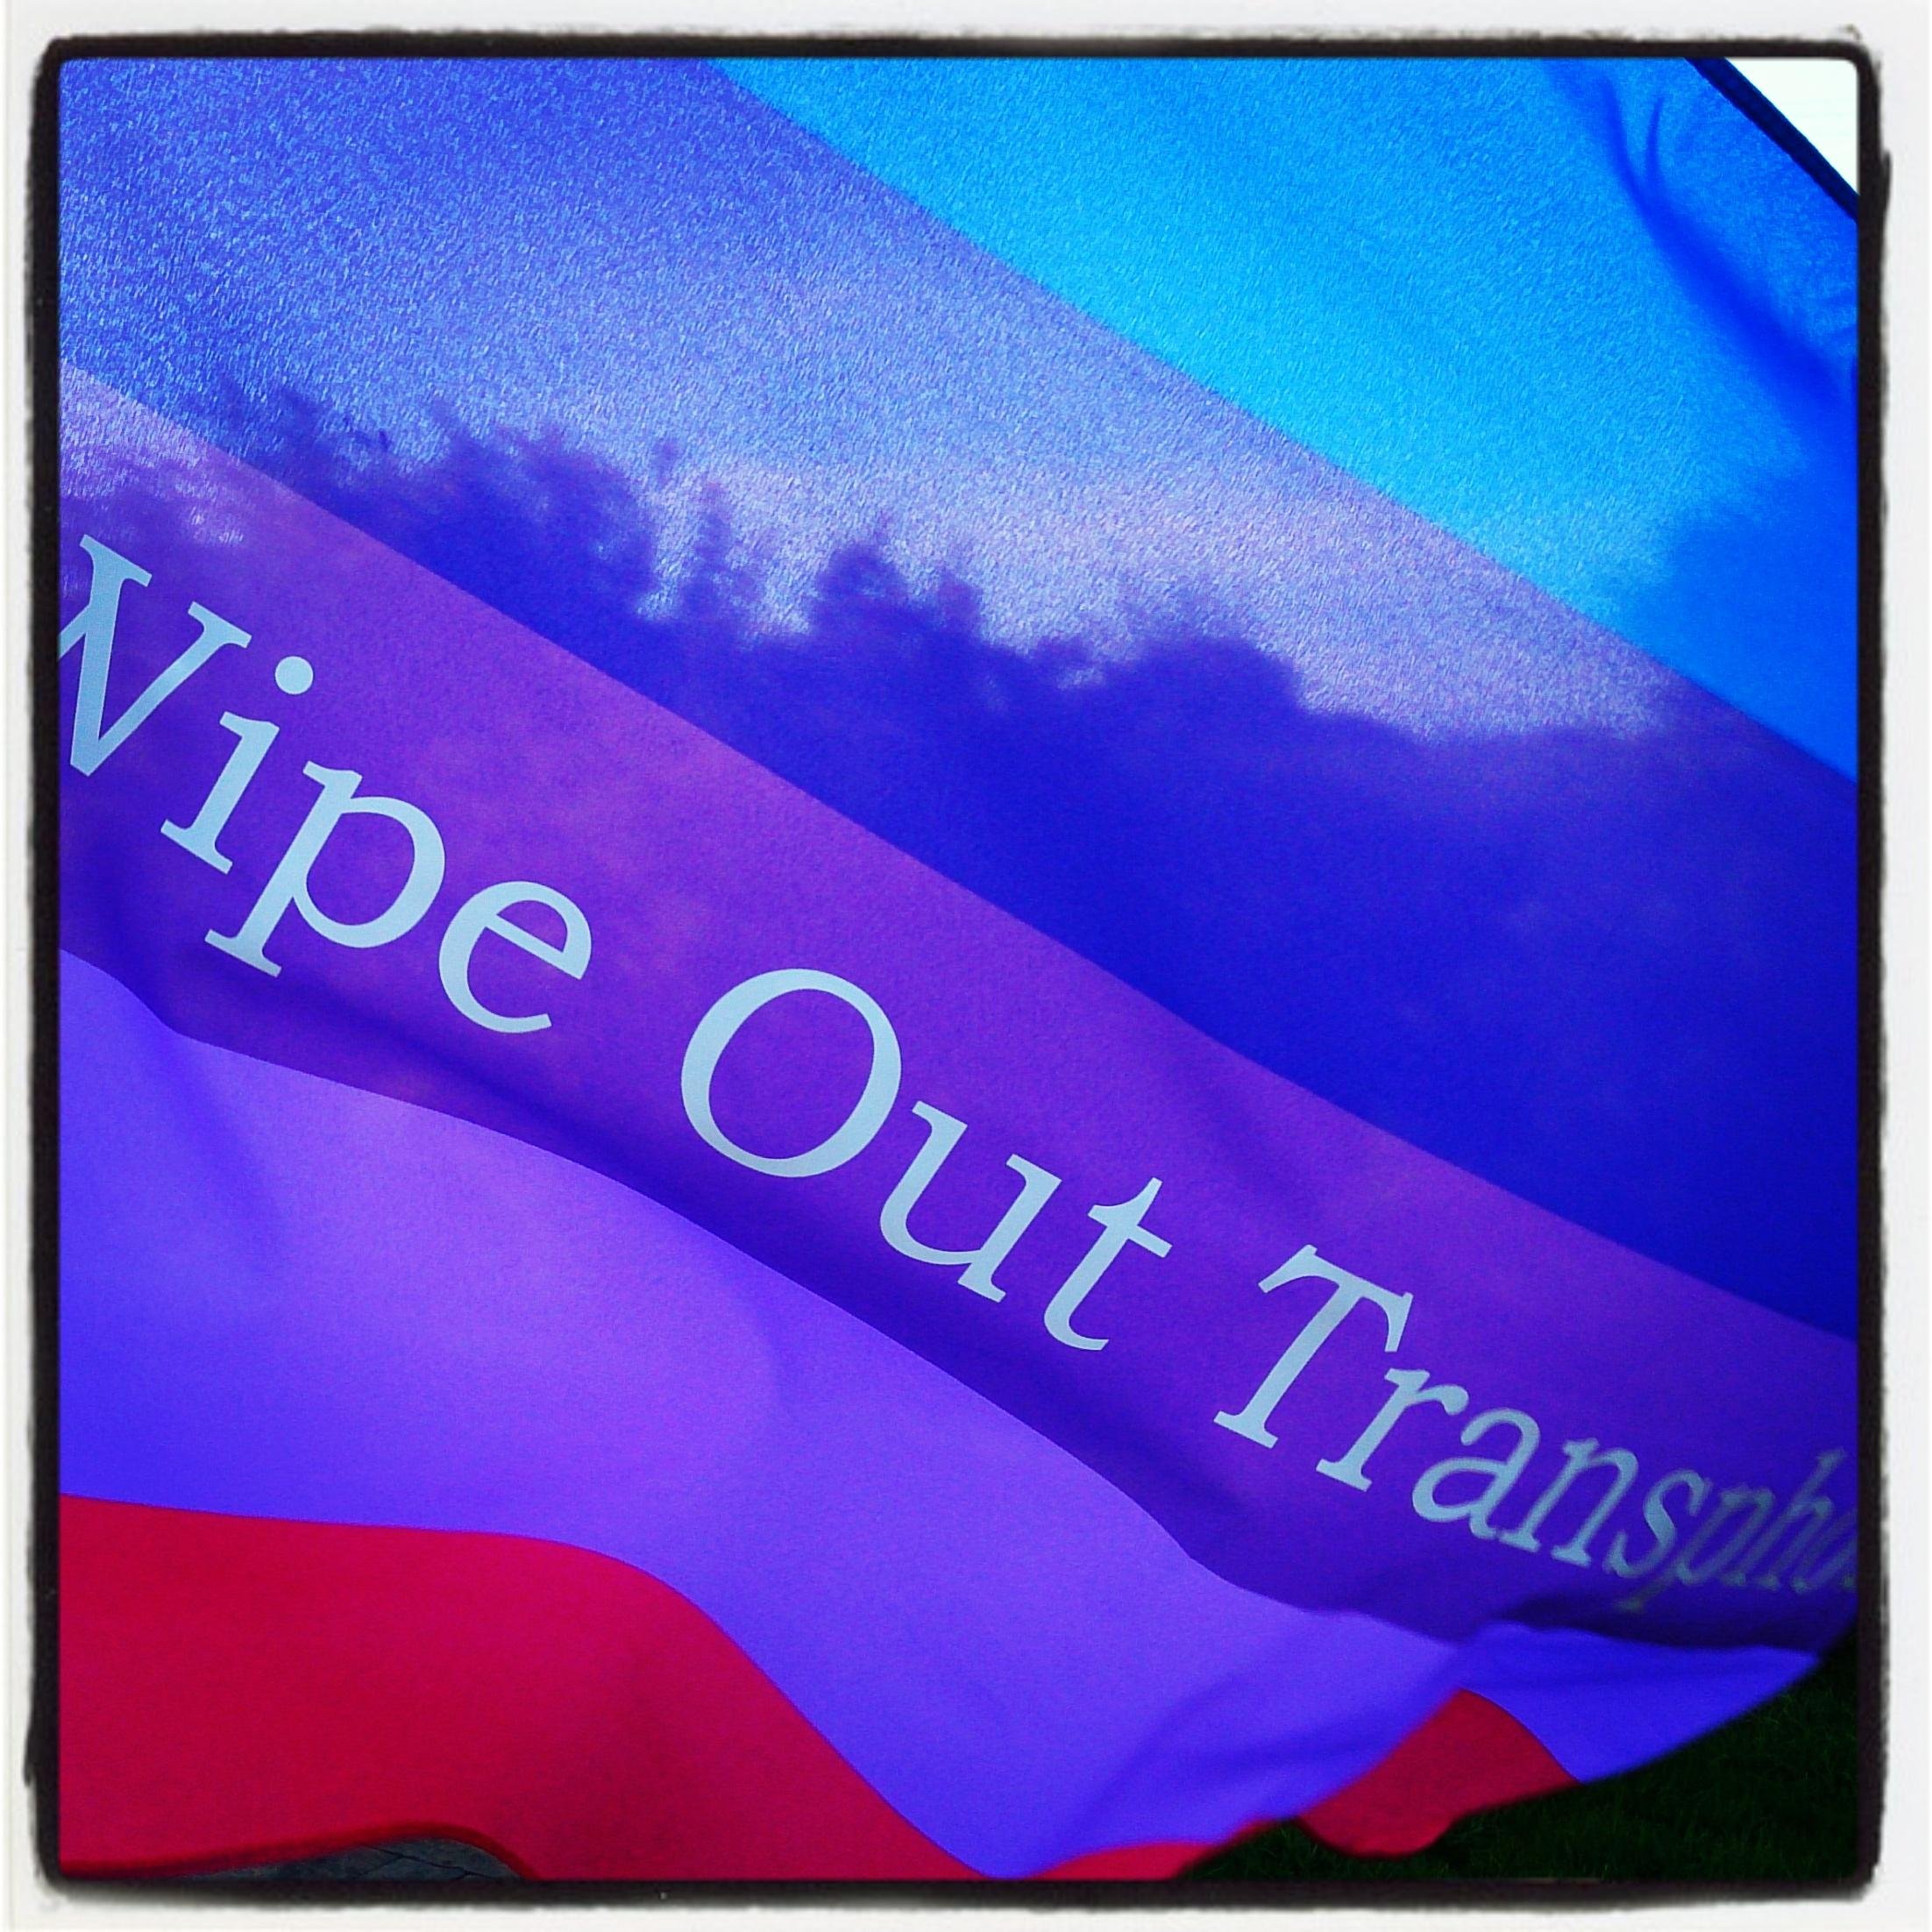 Wipe Out Transphobia